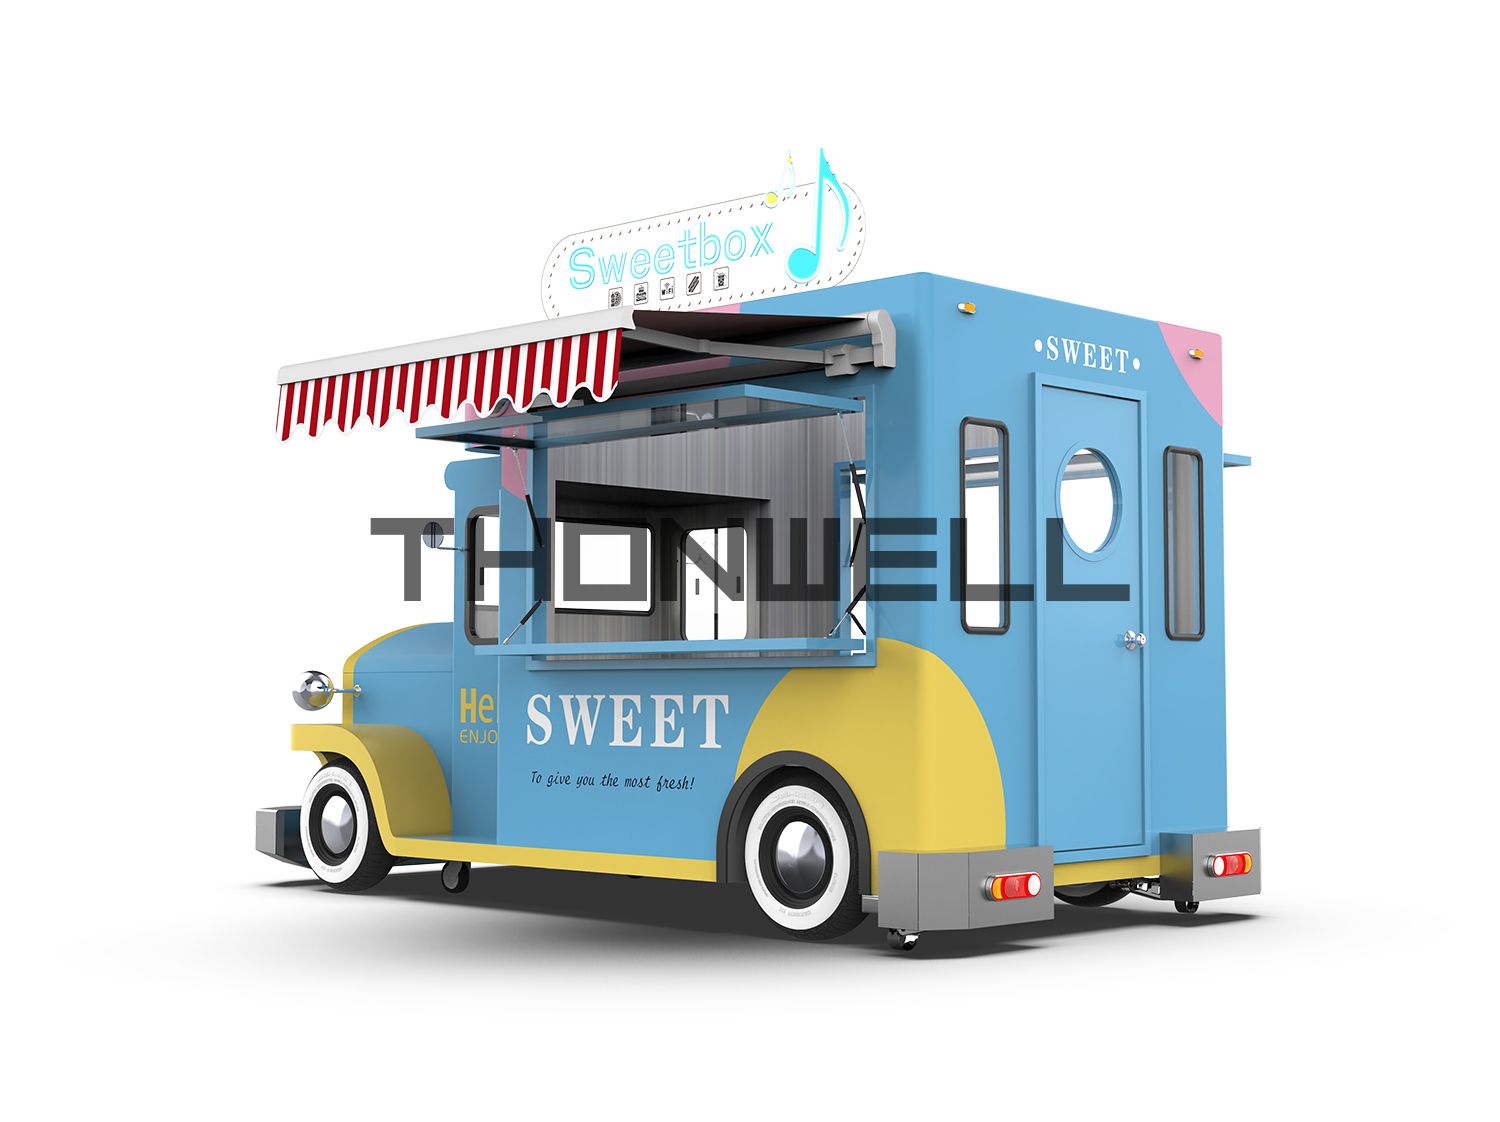 Food truck food cart traile of Polly-42